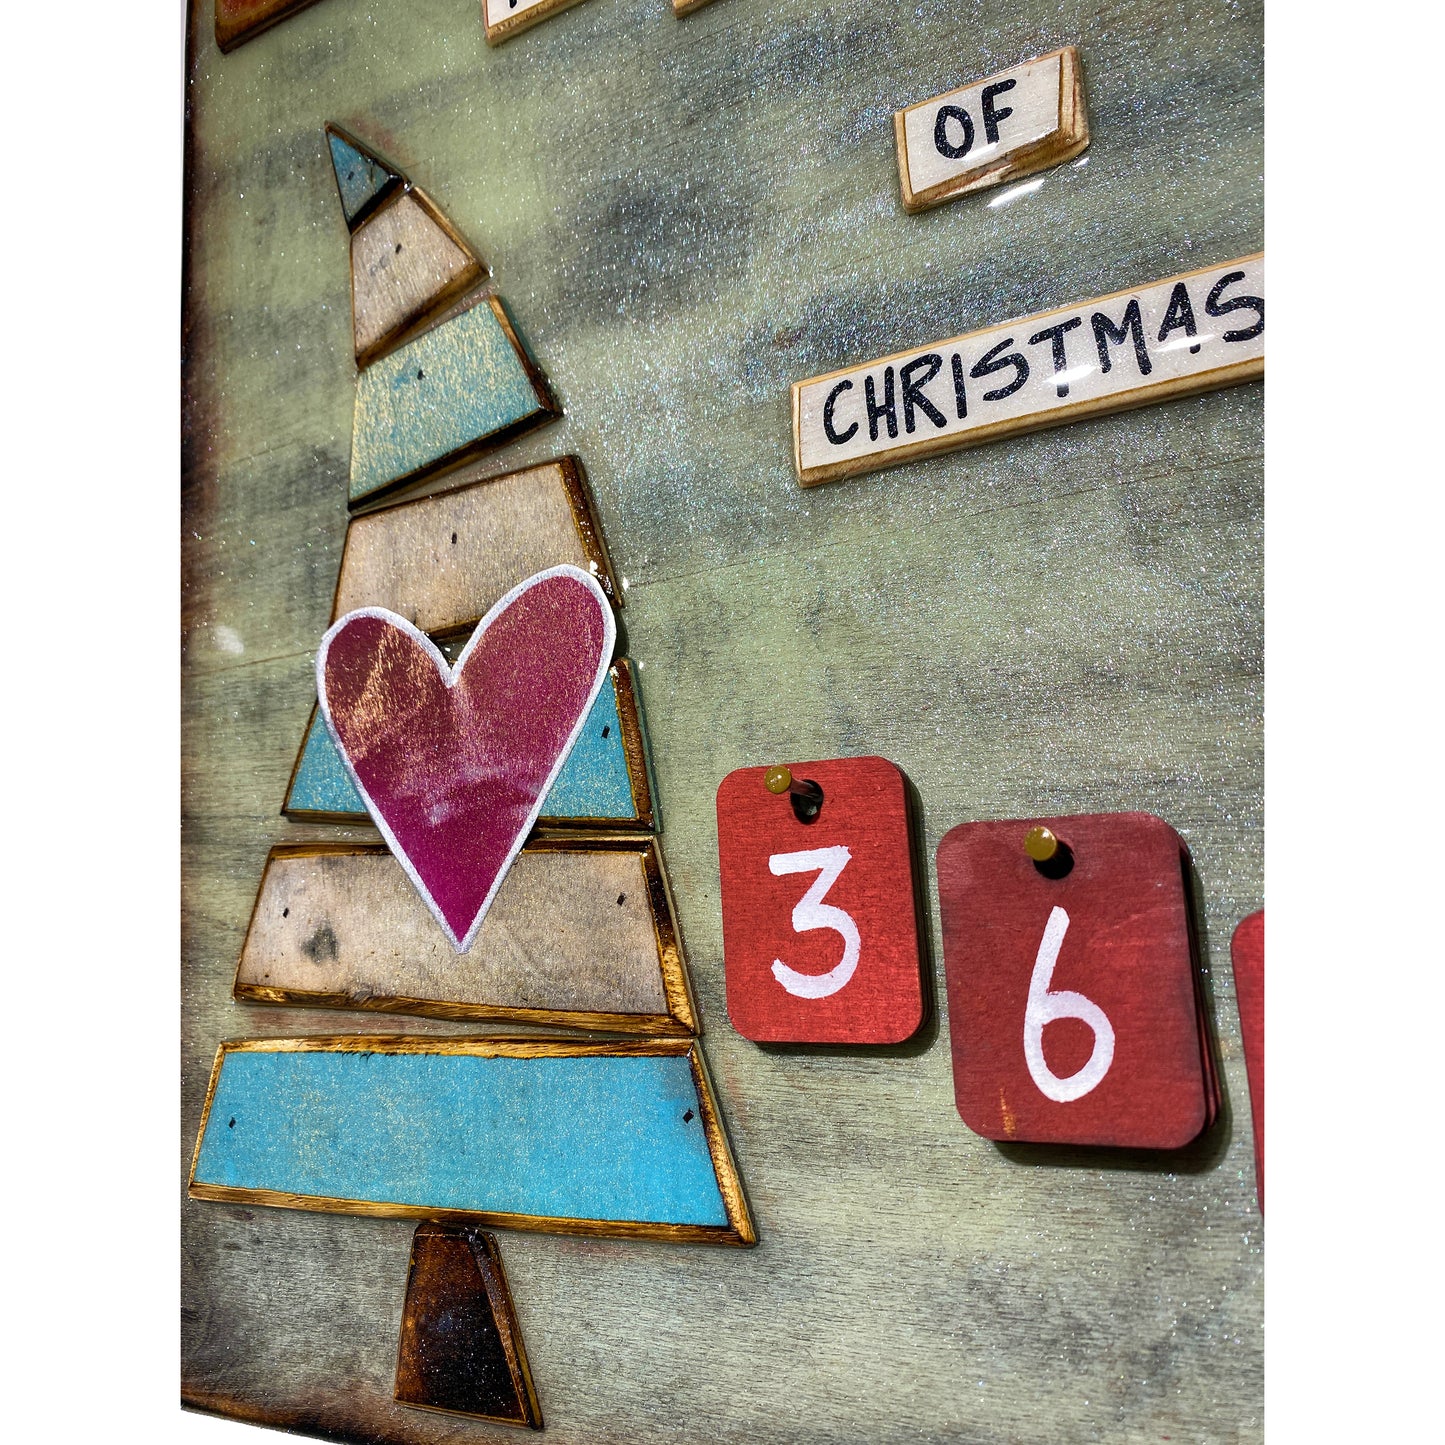 Believe in the Magic of Christmas! Countdown (12"x18")